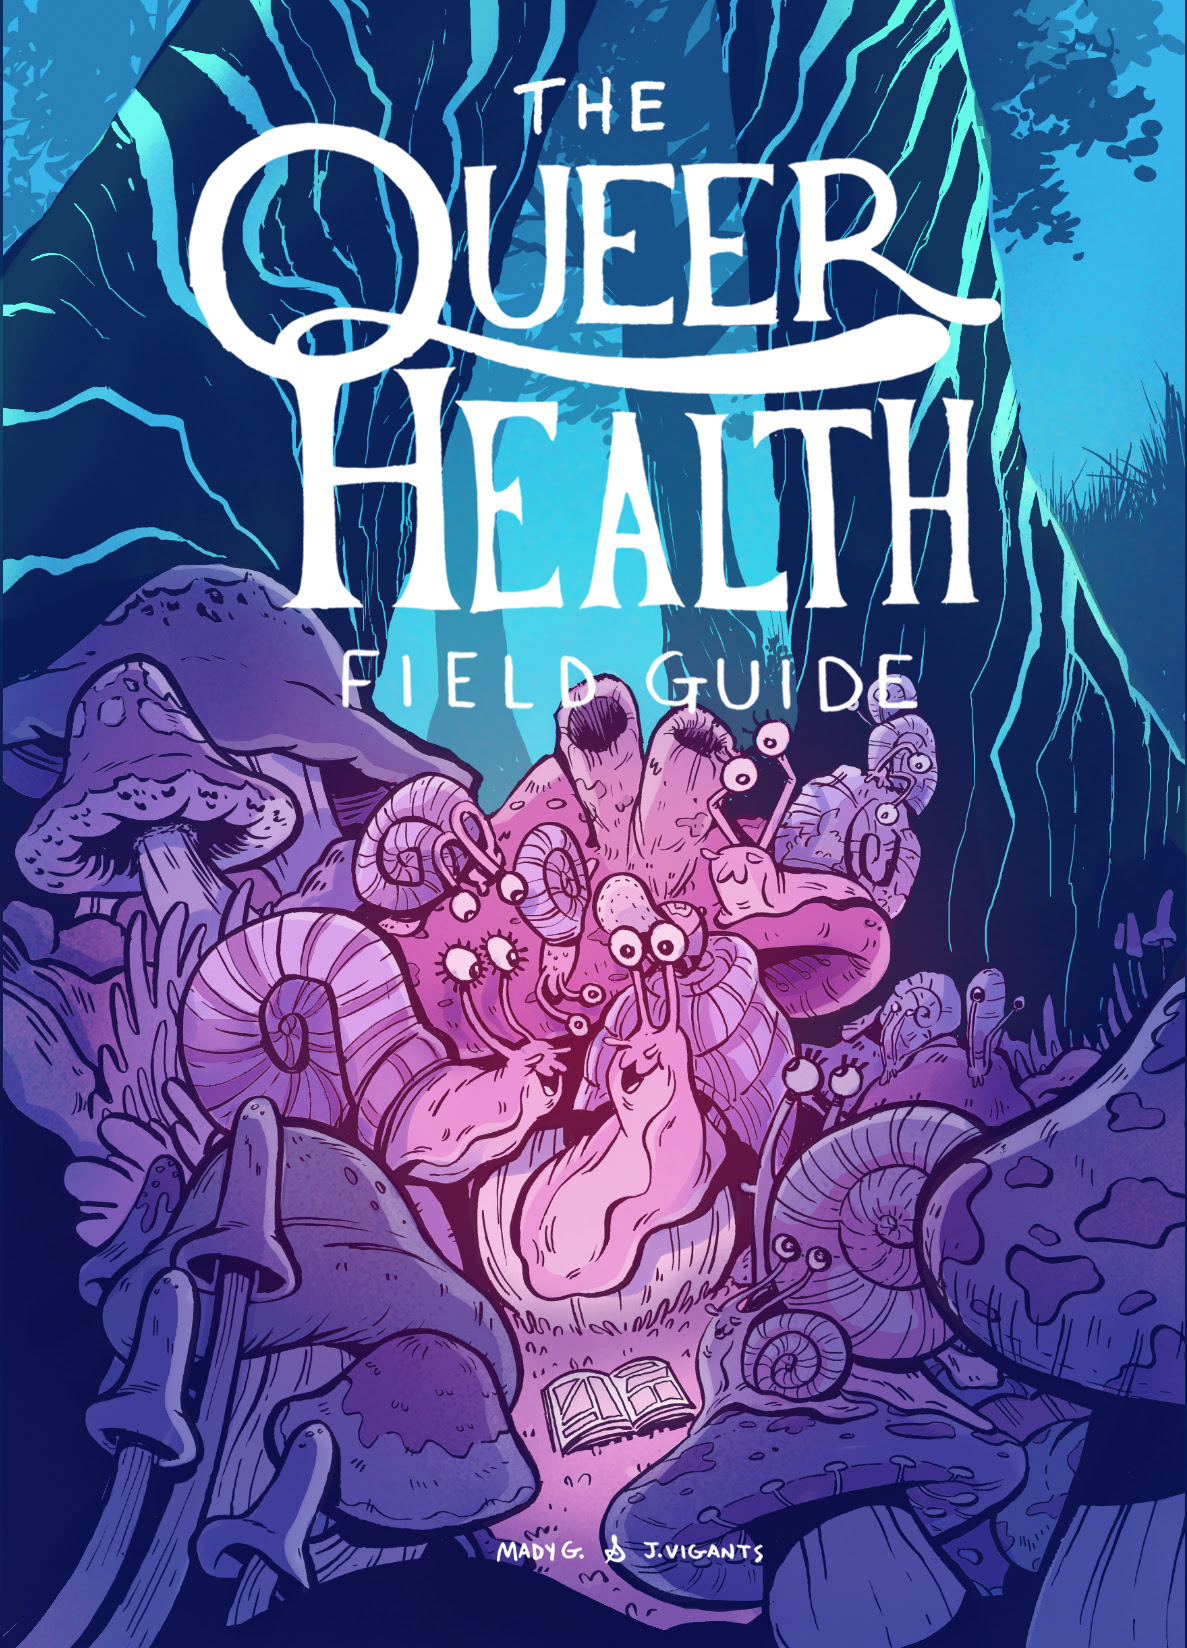 THE QUEER HEALTH FIELD GUIDE by Jude Vigants and Mady G.